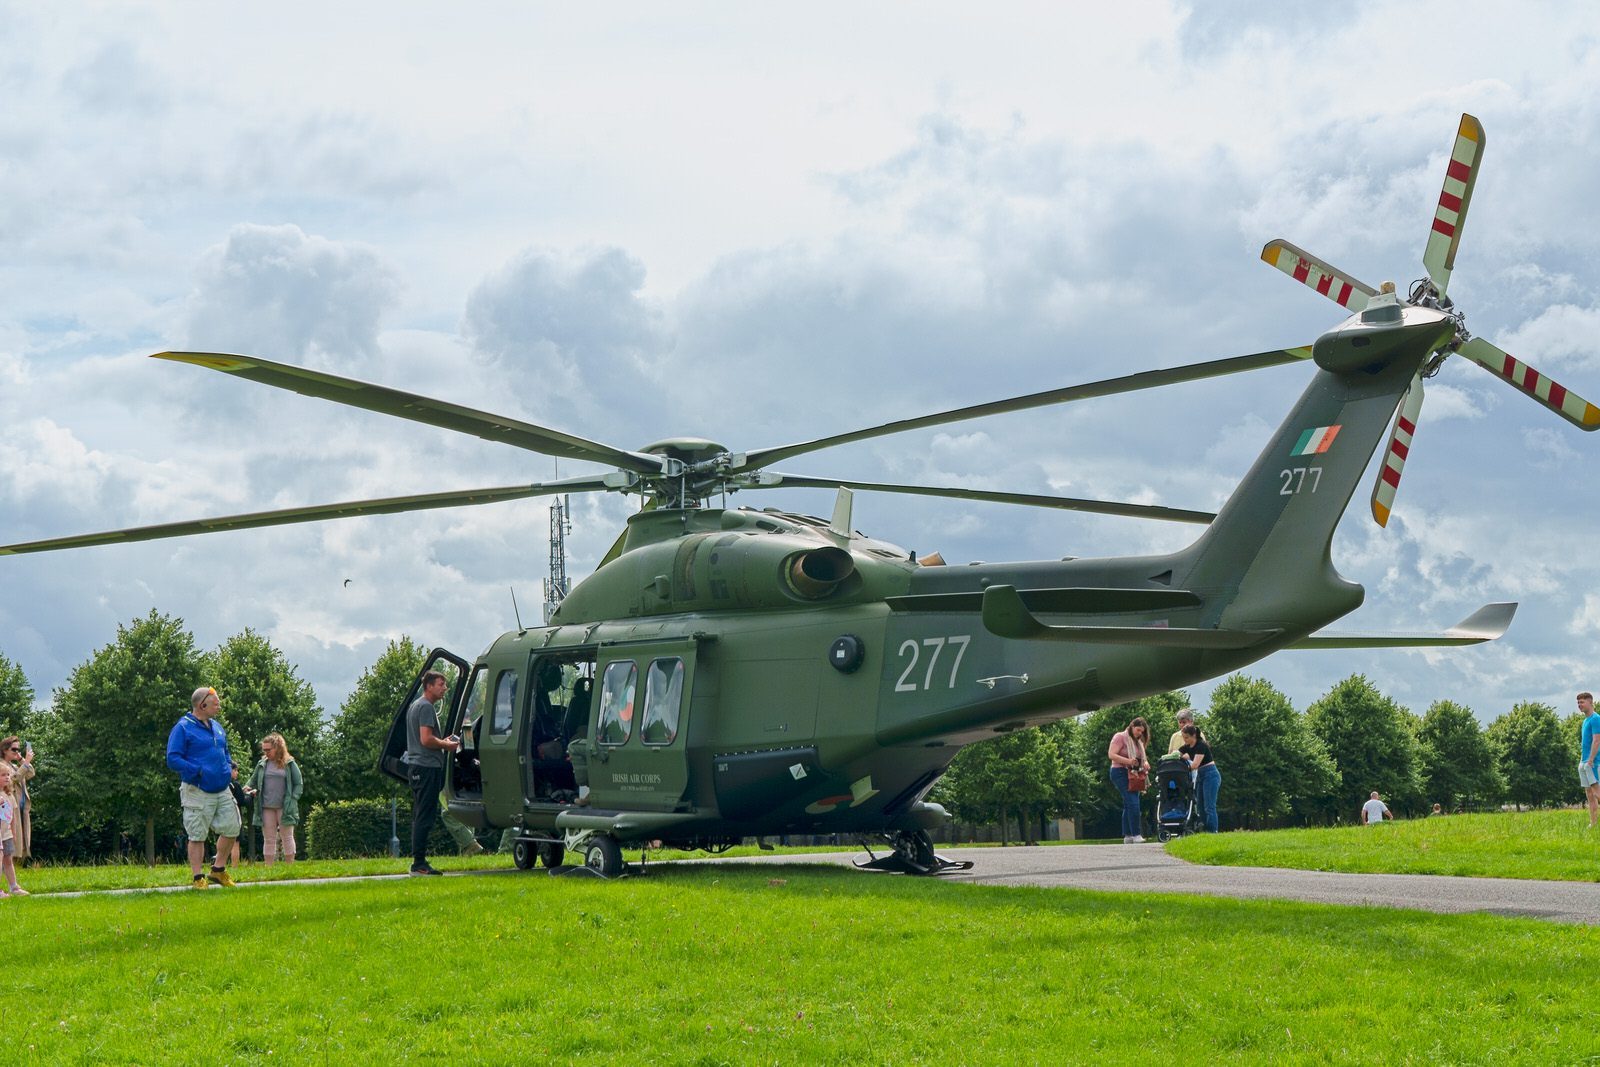 IT IS NOT OFTEN THAT I GET TO SEE A HELICOPTER UP CLOSE [EUROCOPTER EX135 T2] 002